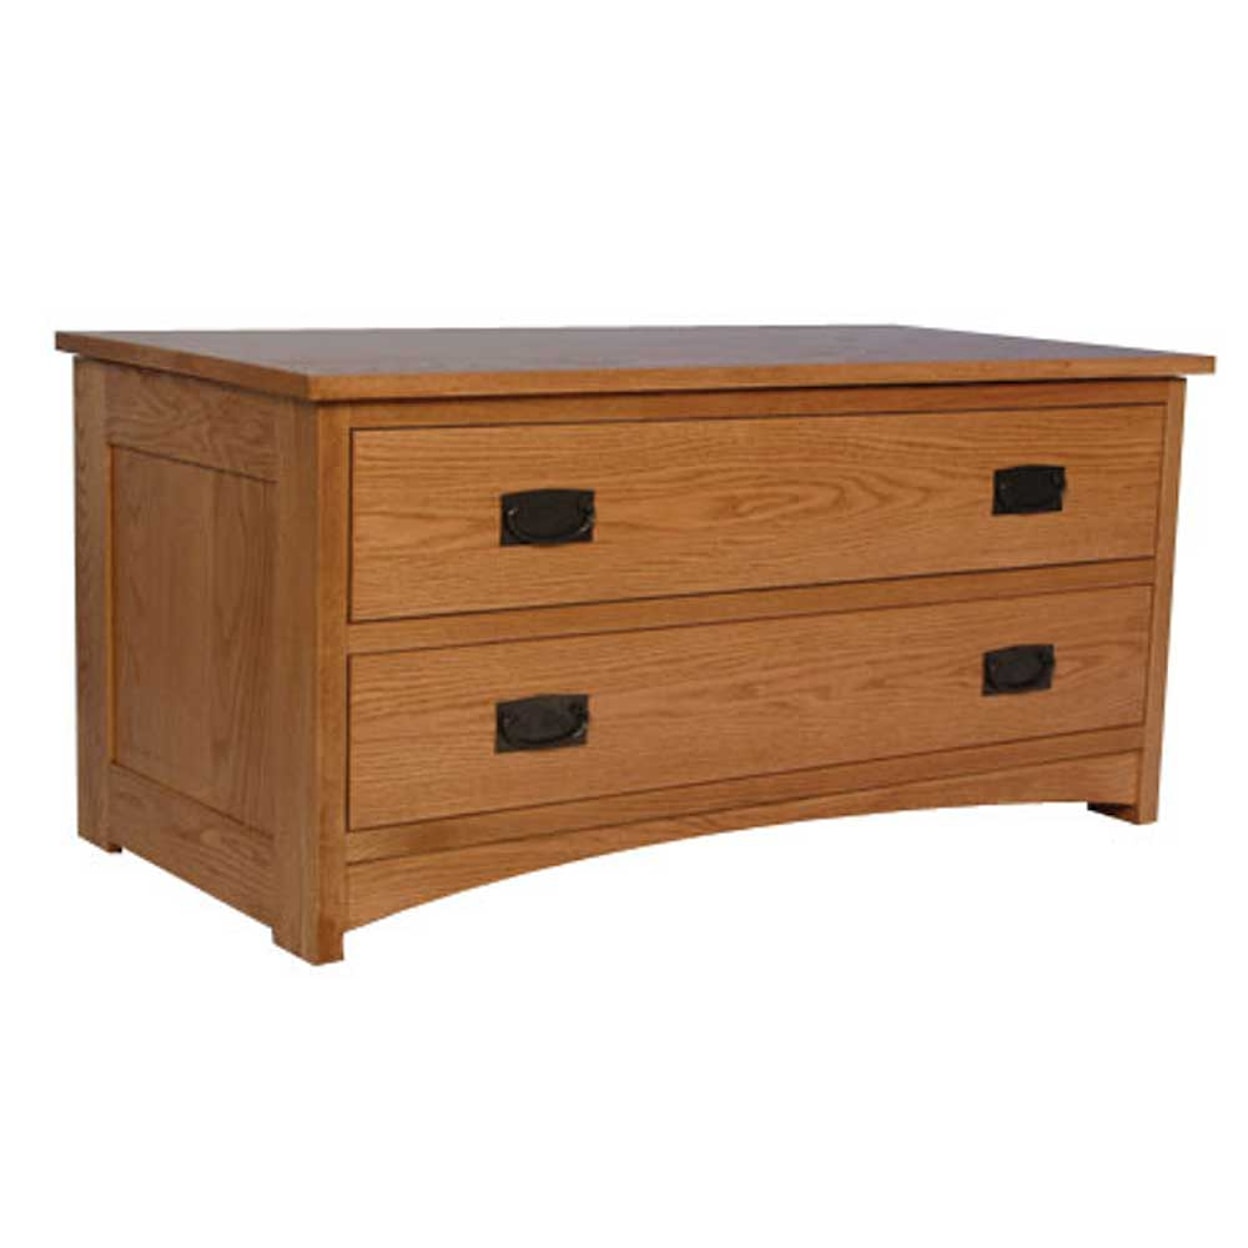 Simply Amish Prairie Mission Blanket Chest with False Fronts